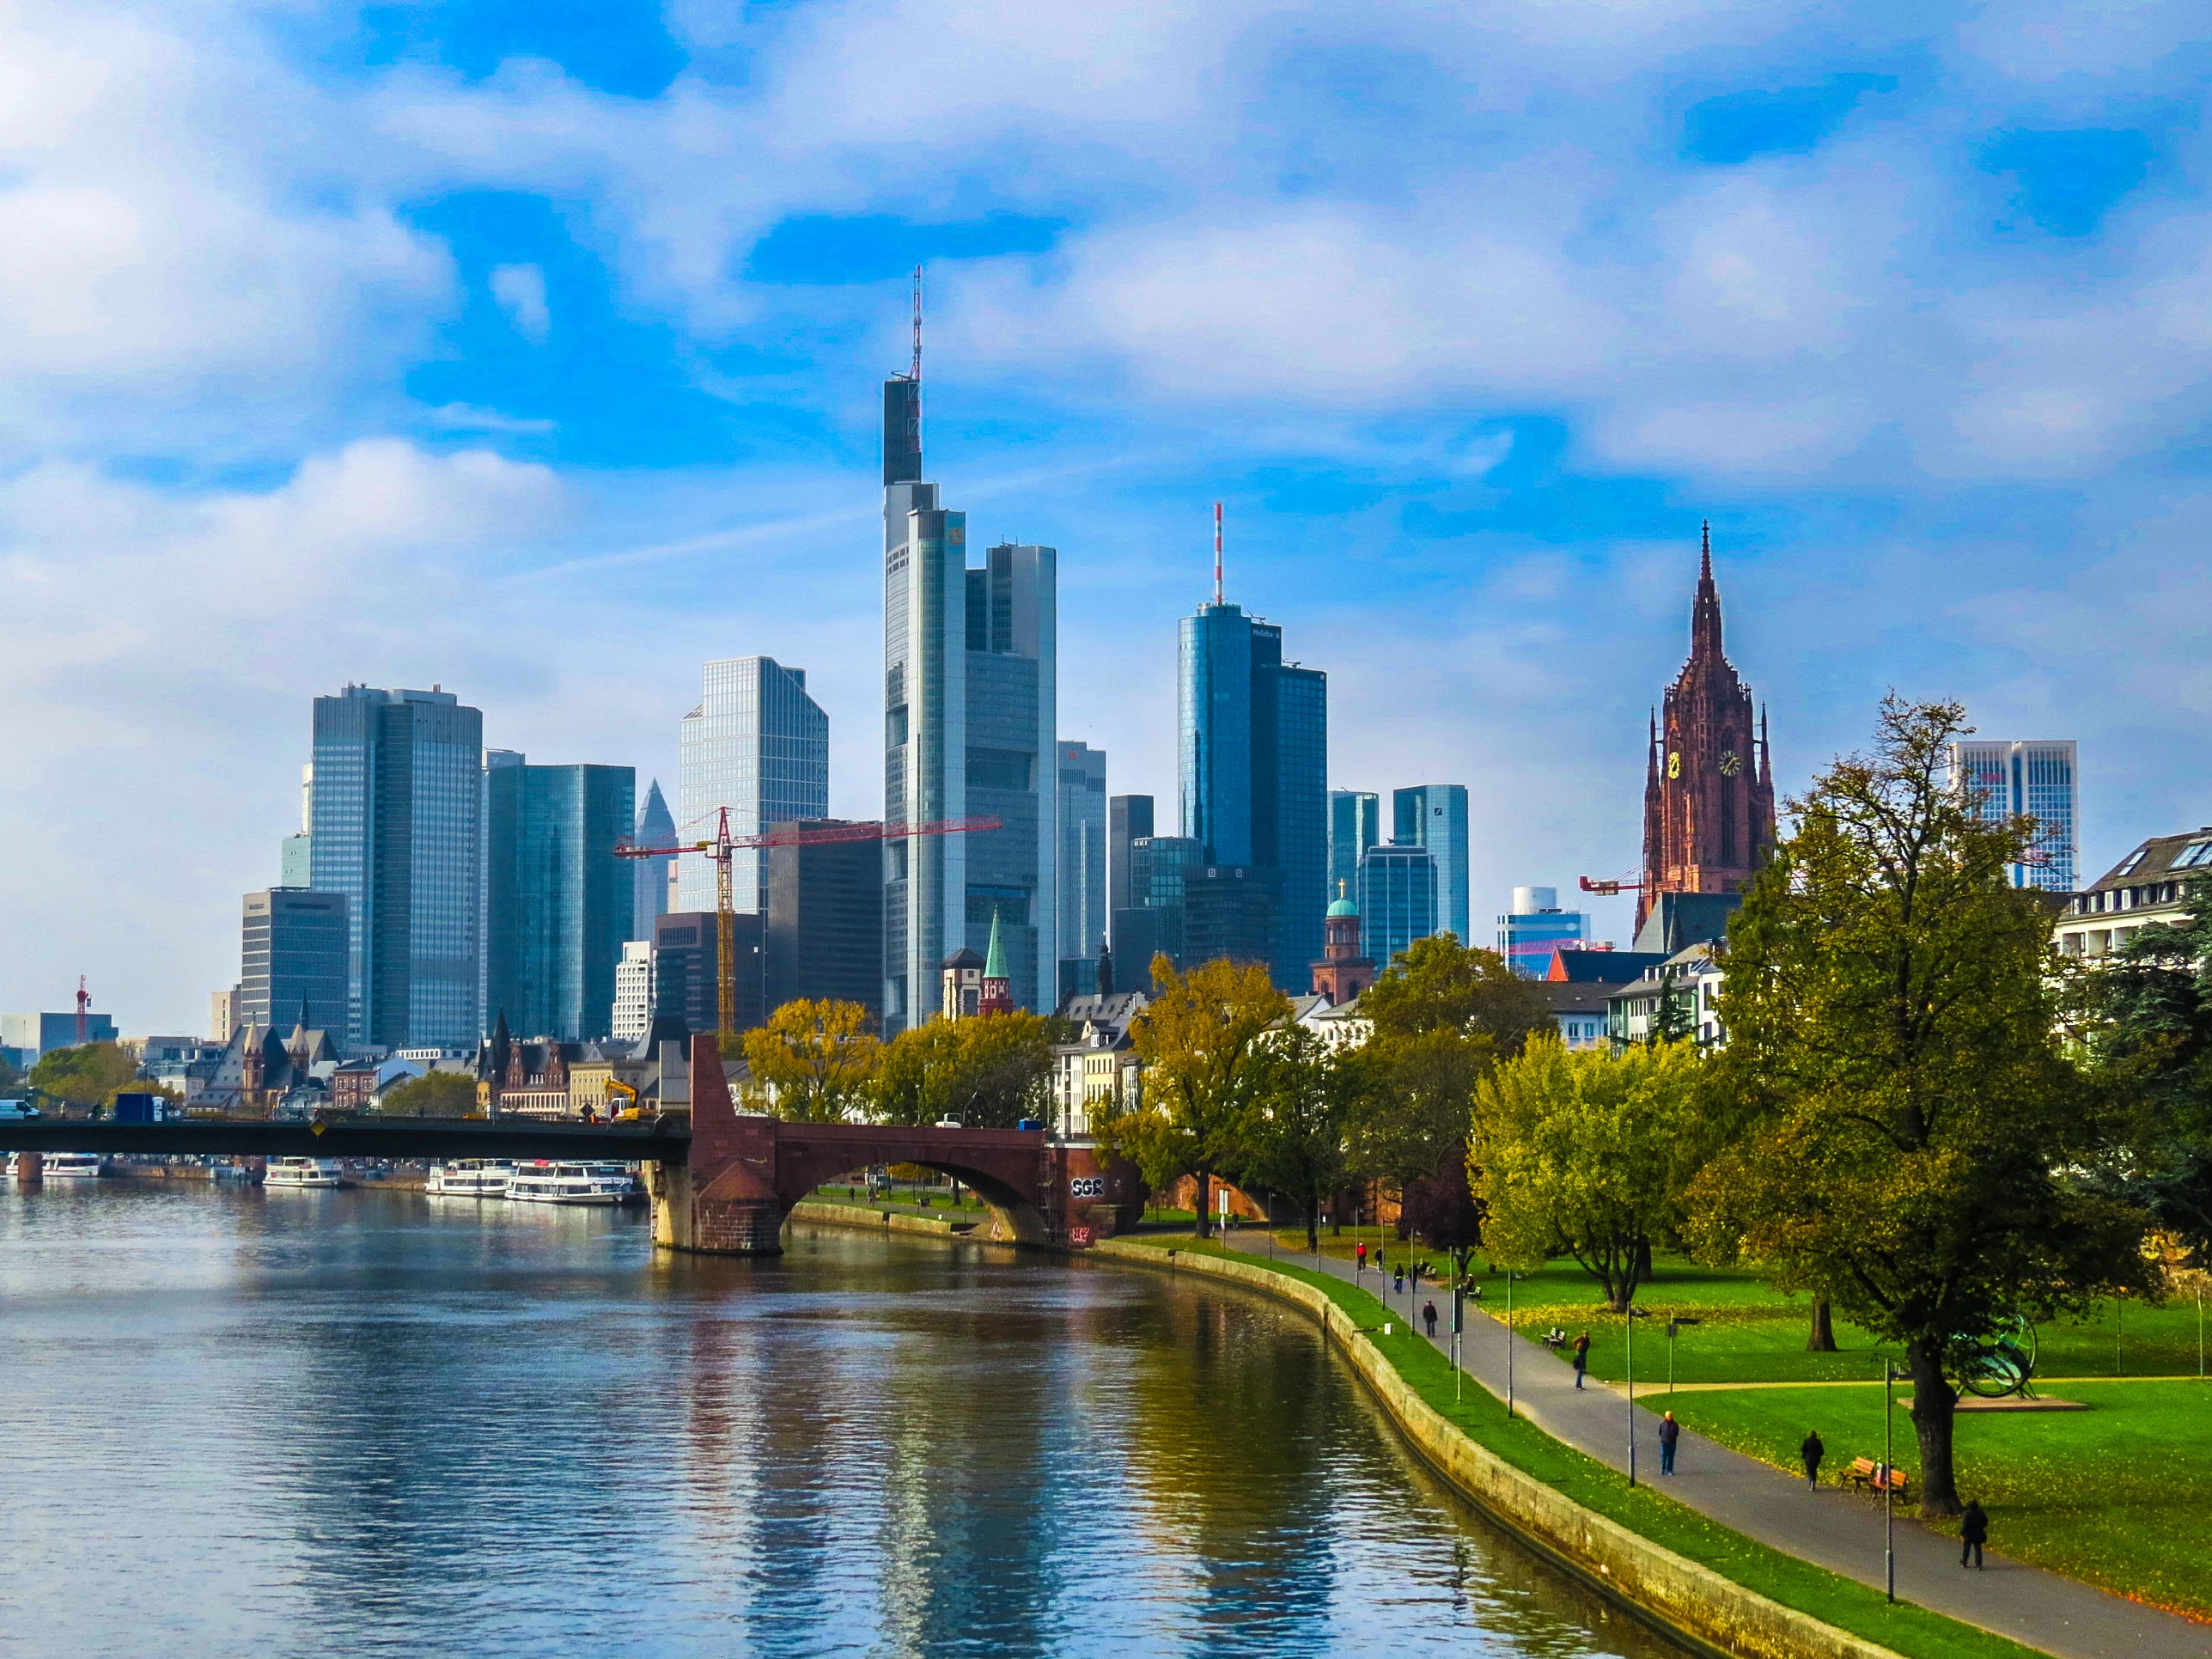 ODDO BHF risk services employees in Frankfurt will be integrated with StatPro’s existing operations